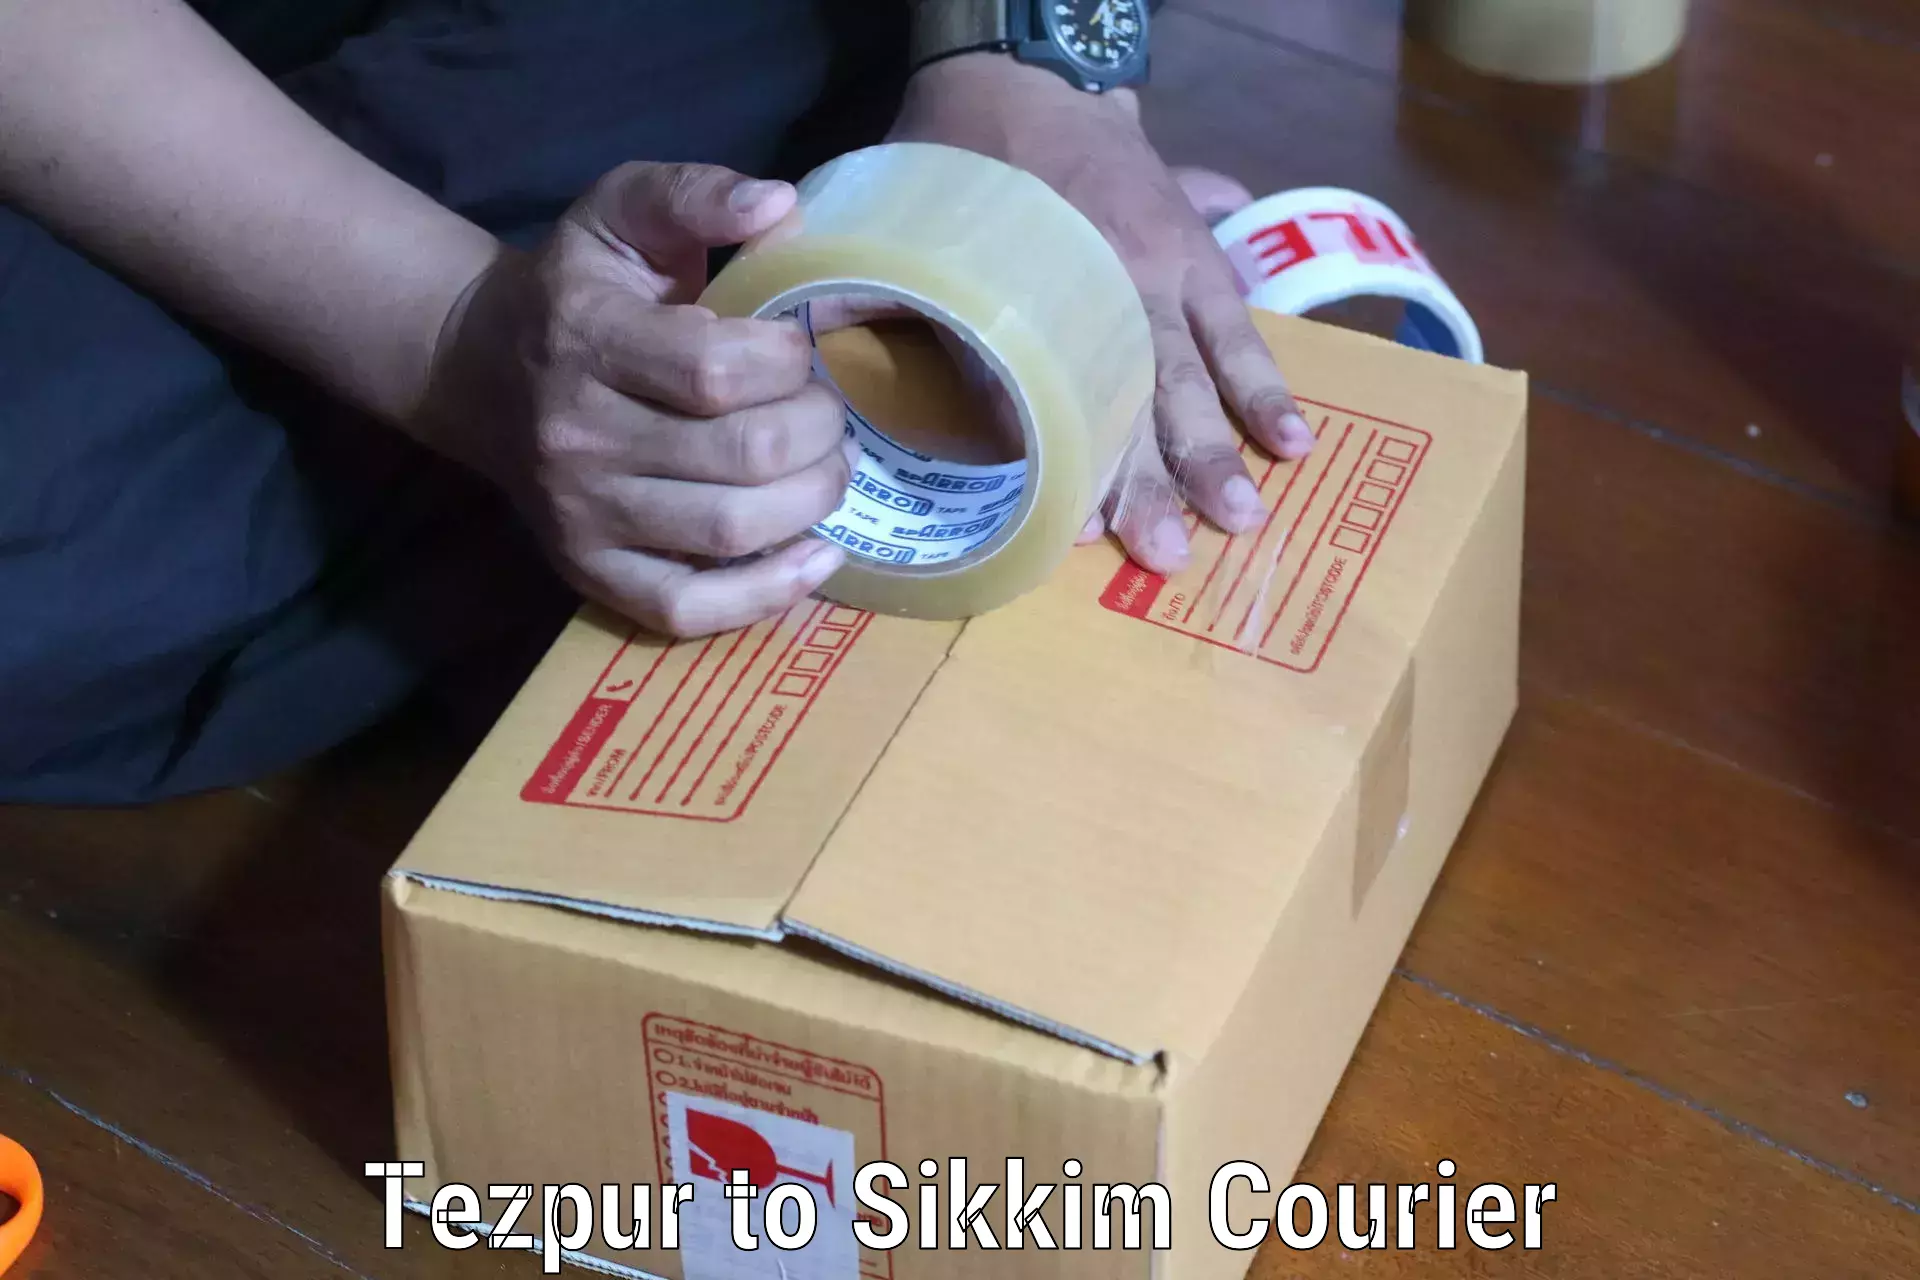 Doorstep delivery service Tezpur to North Sikkim